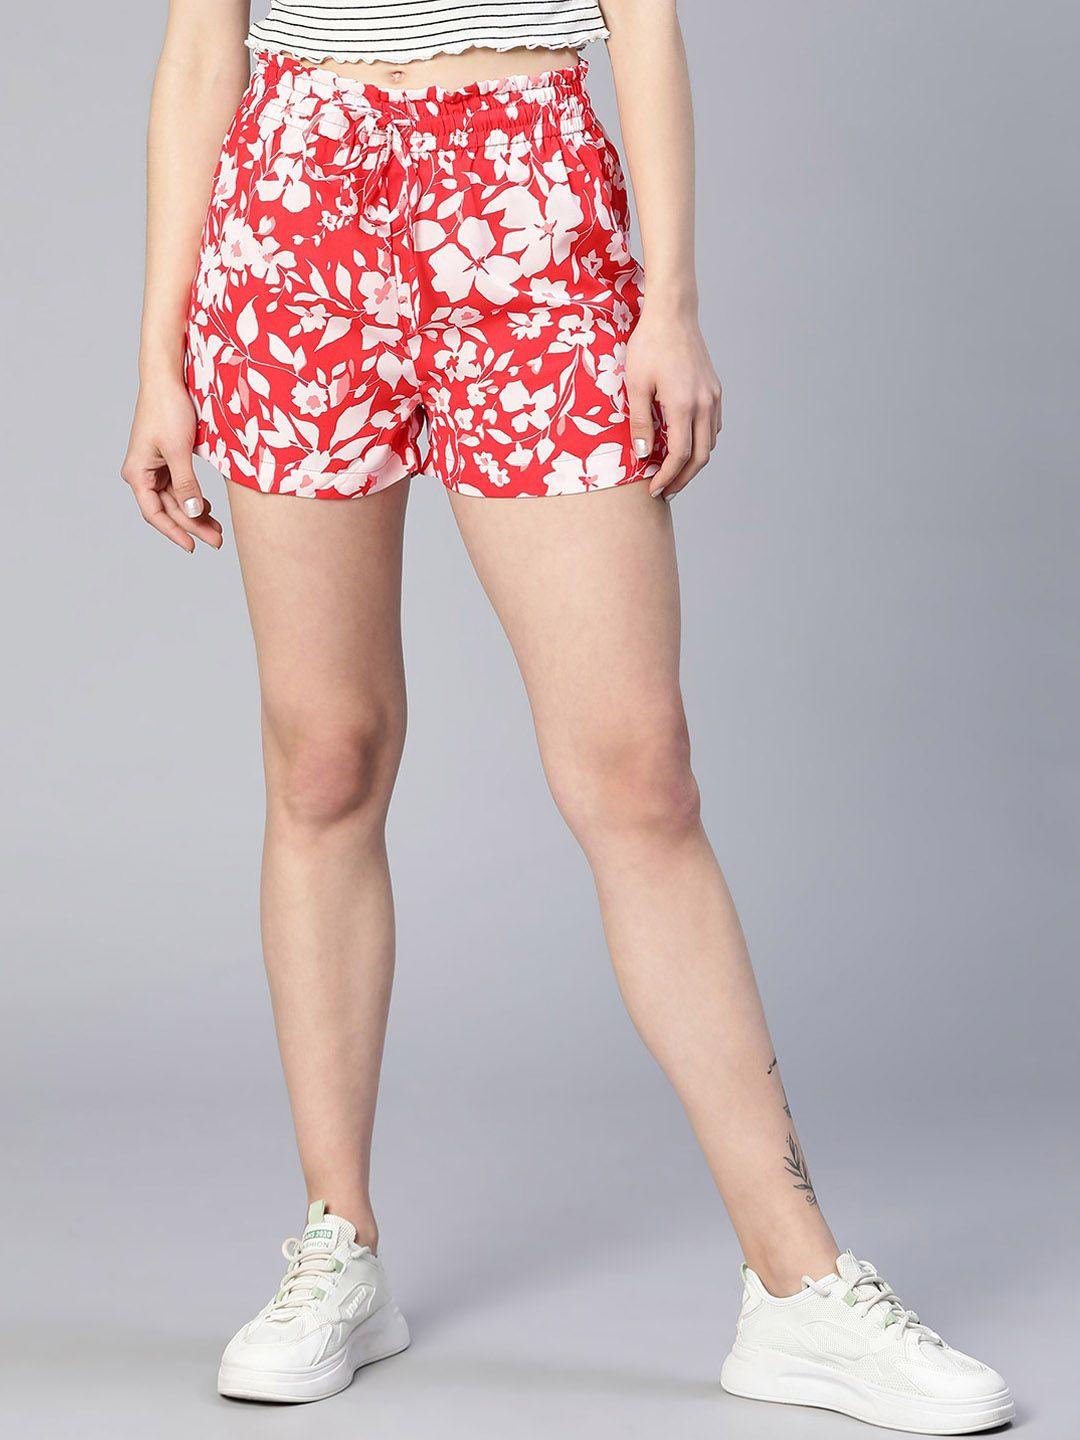 oxolloxo women floral printed mid rise shorts